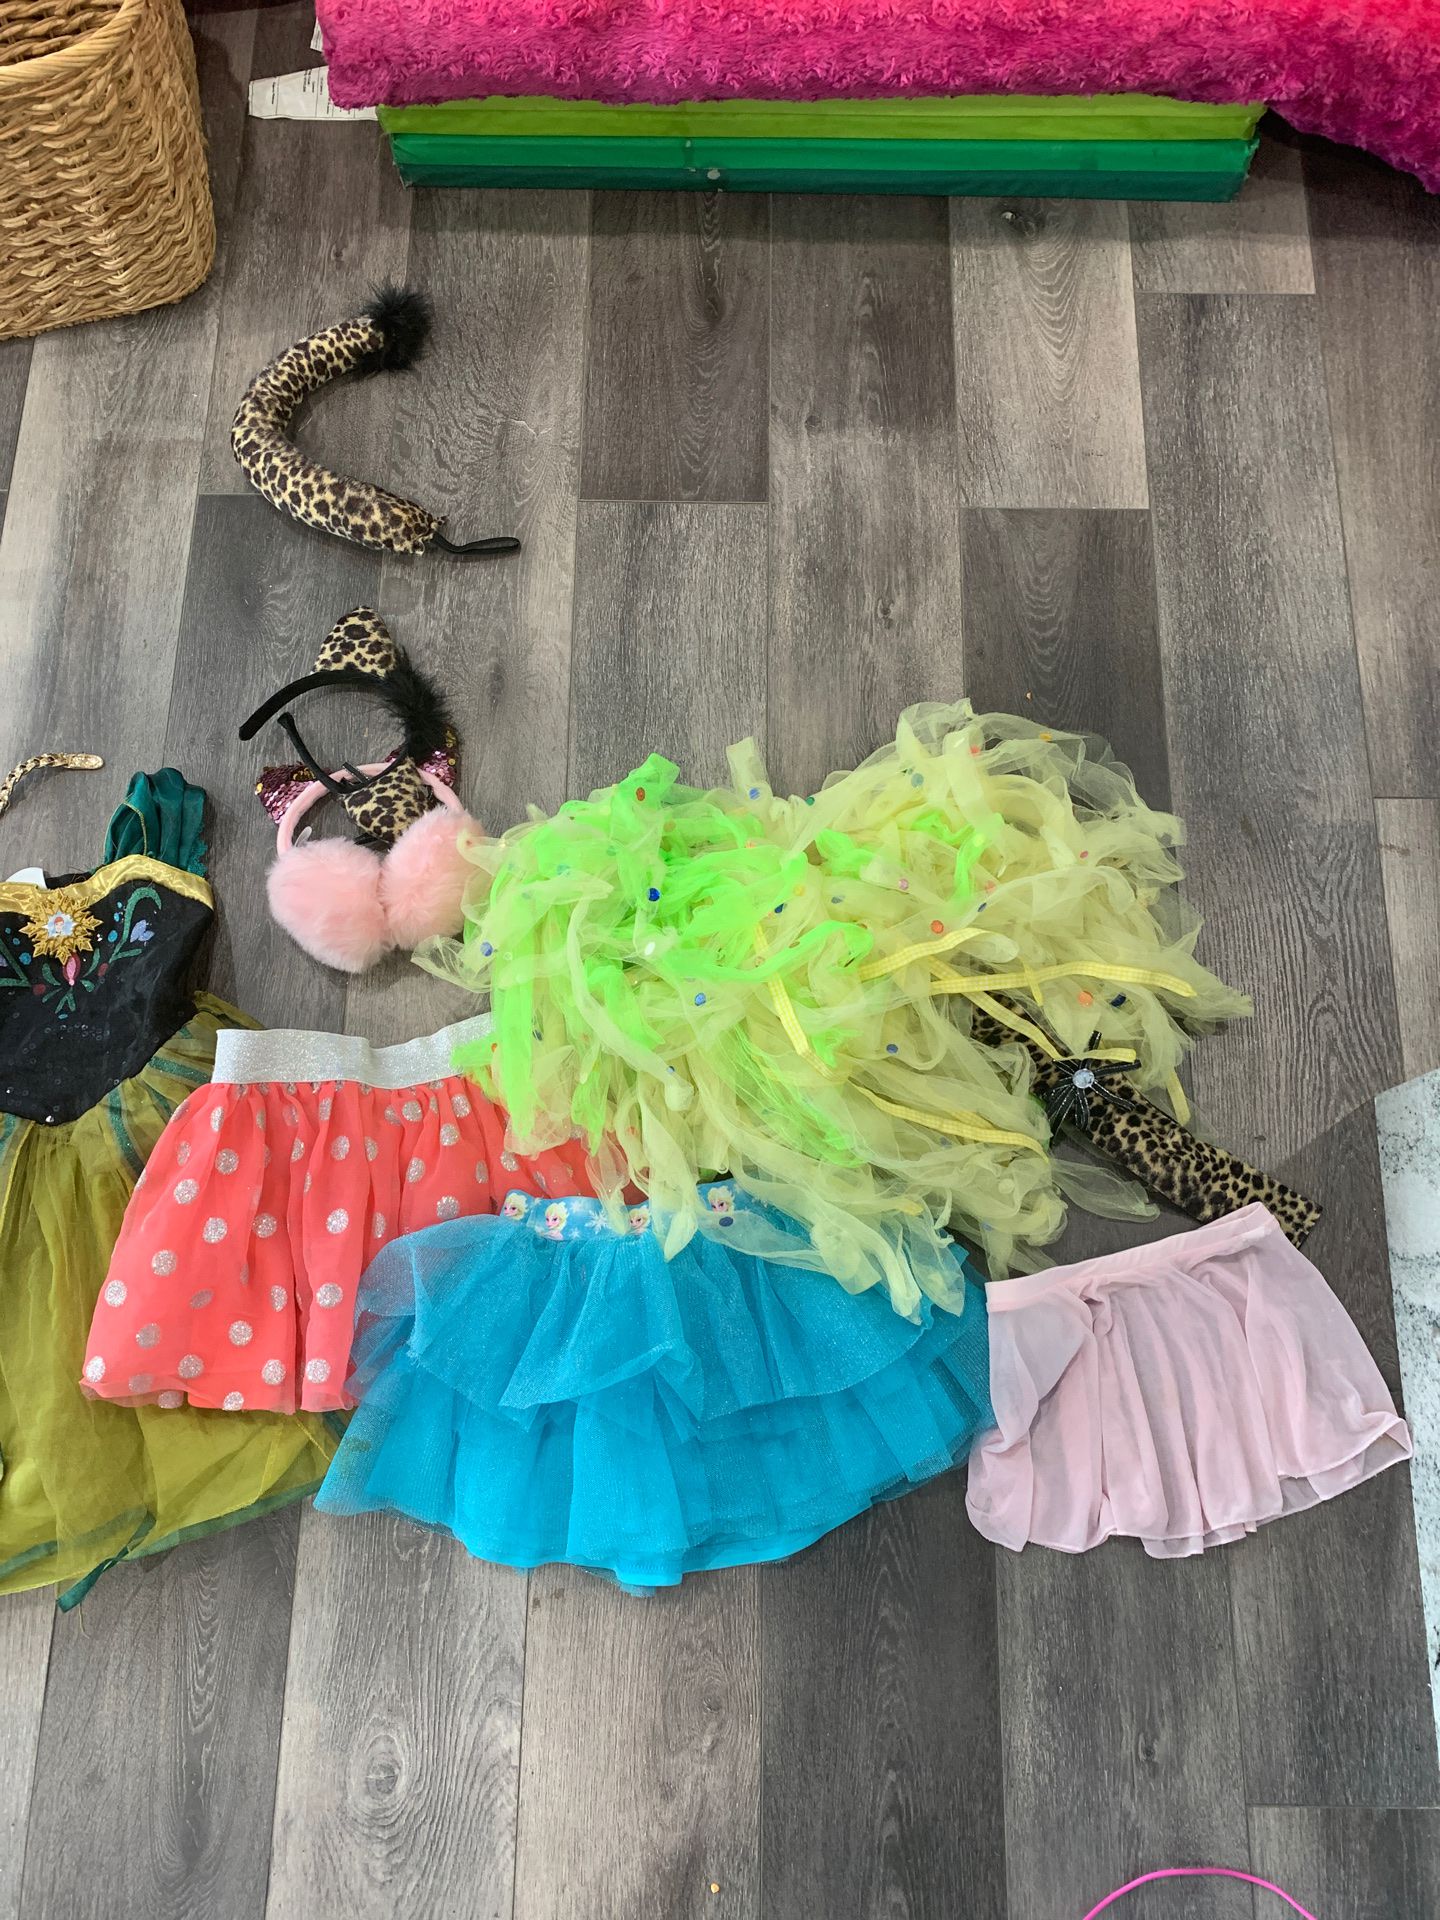 Little Girls costumes, Tutus, and dresses